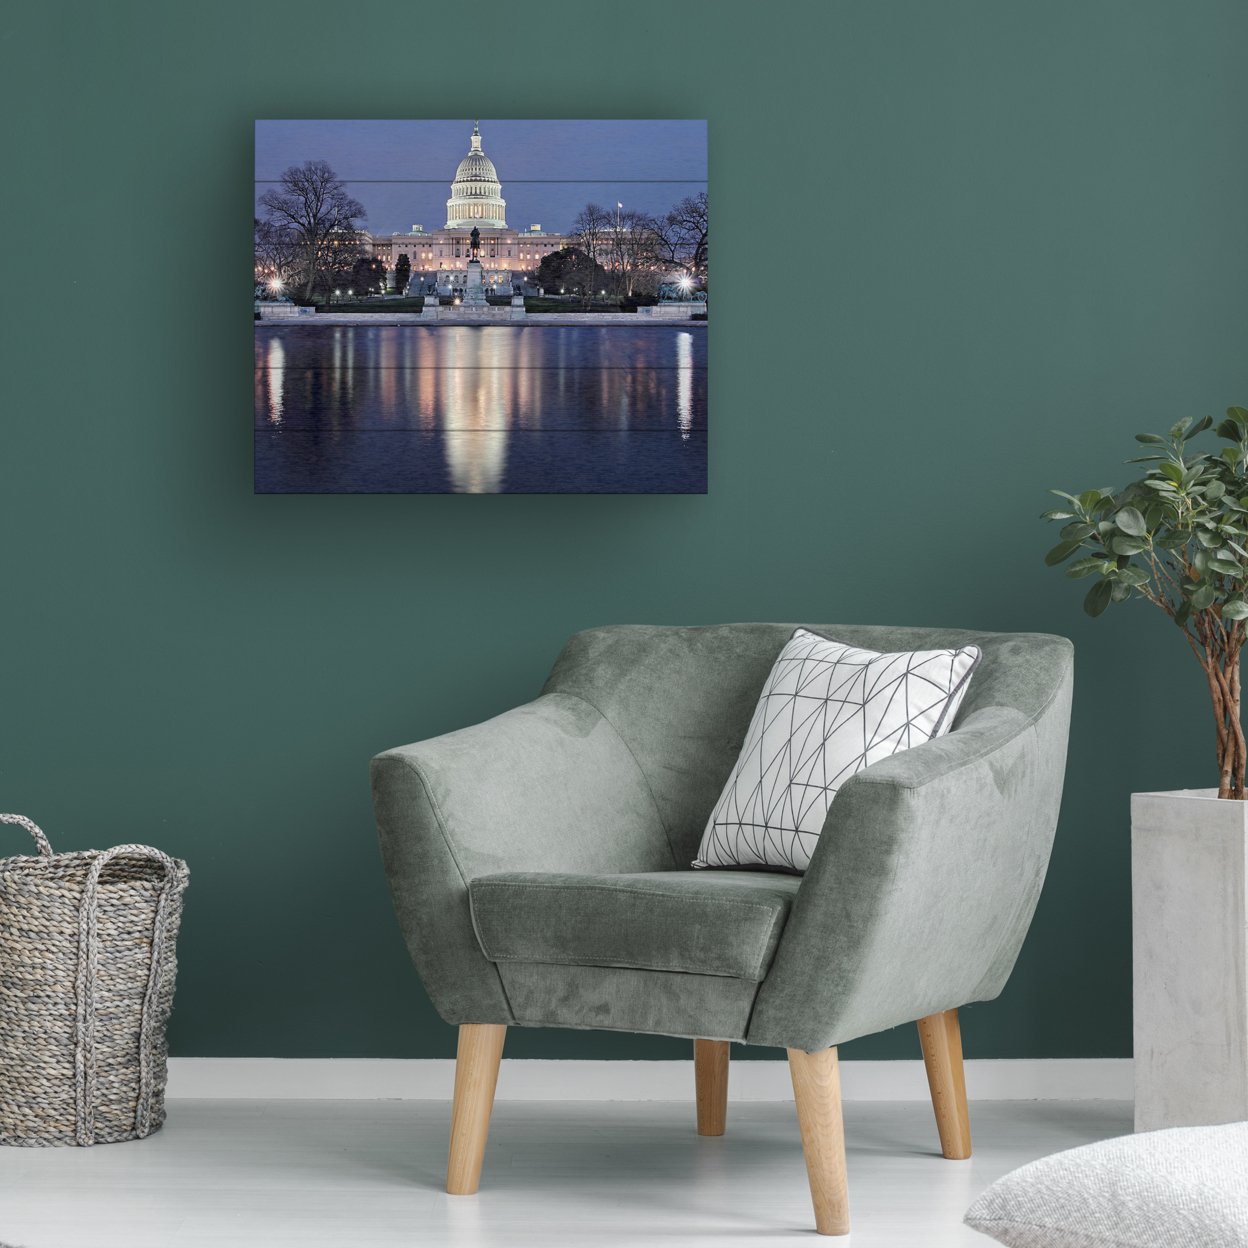 Wooden Slat Art 18 X 22 Inches Titled Capitol Reflections Ready To Hang Home Decor Picture